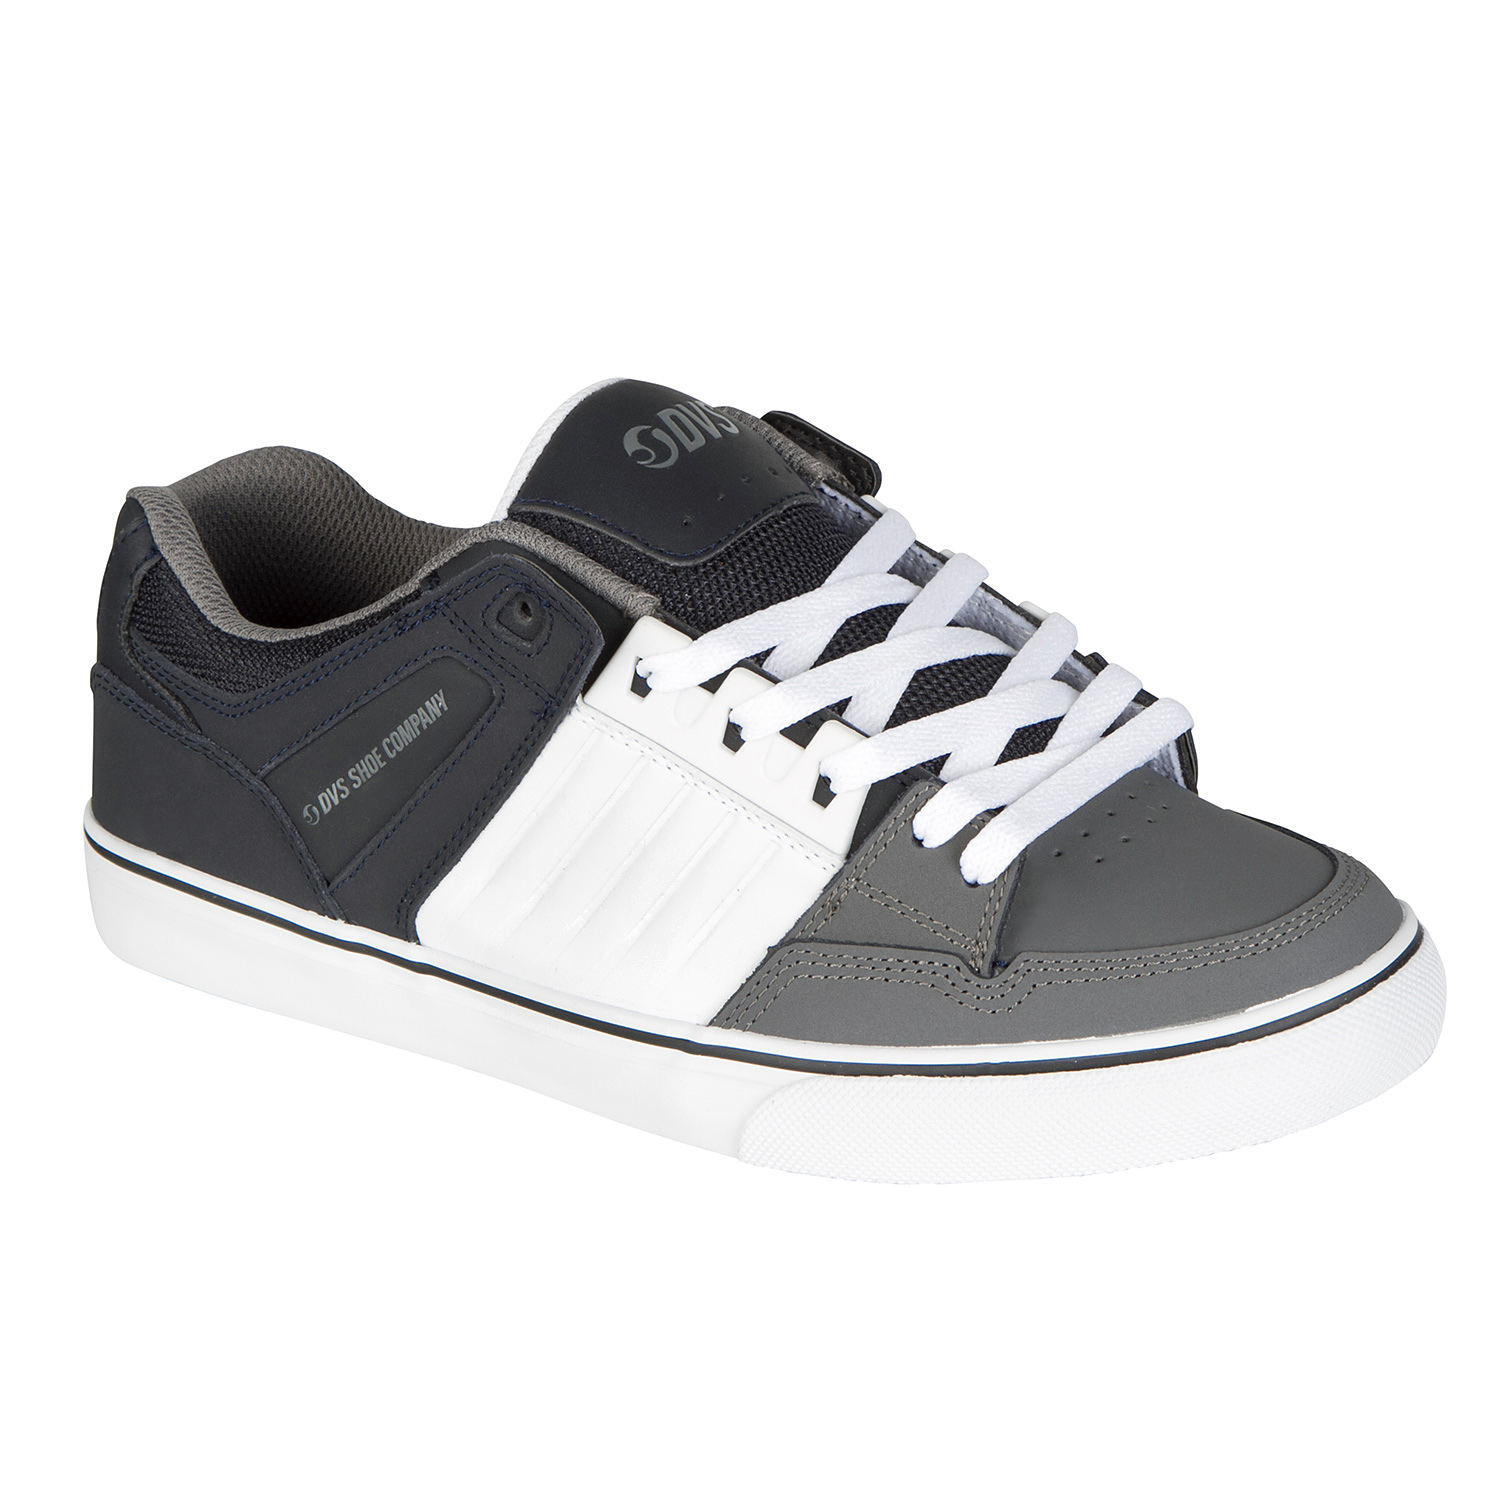 DVS Scarpe Celsius CT Navy/White/Charcoal Leather